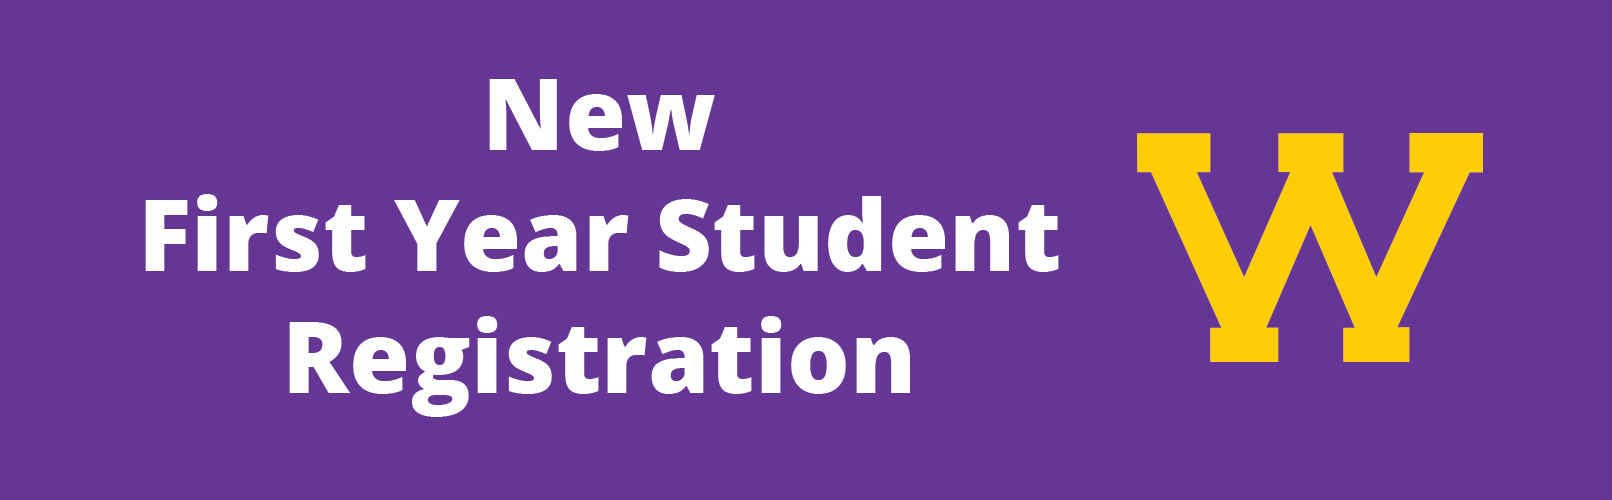 New First Year Student Registration Banner